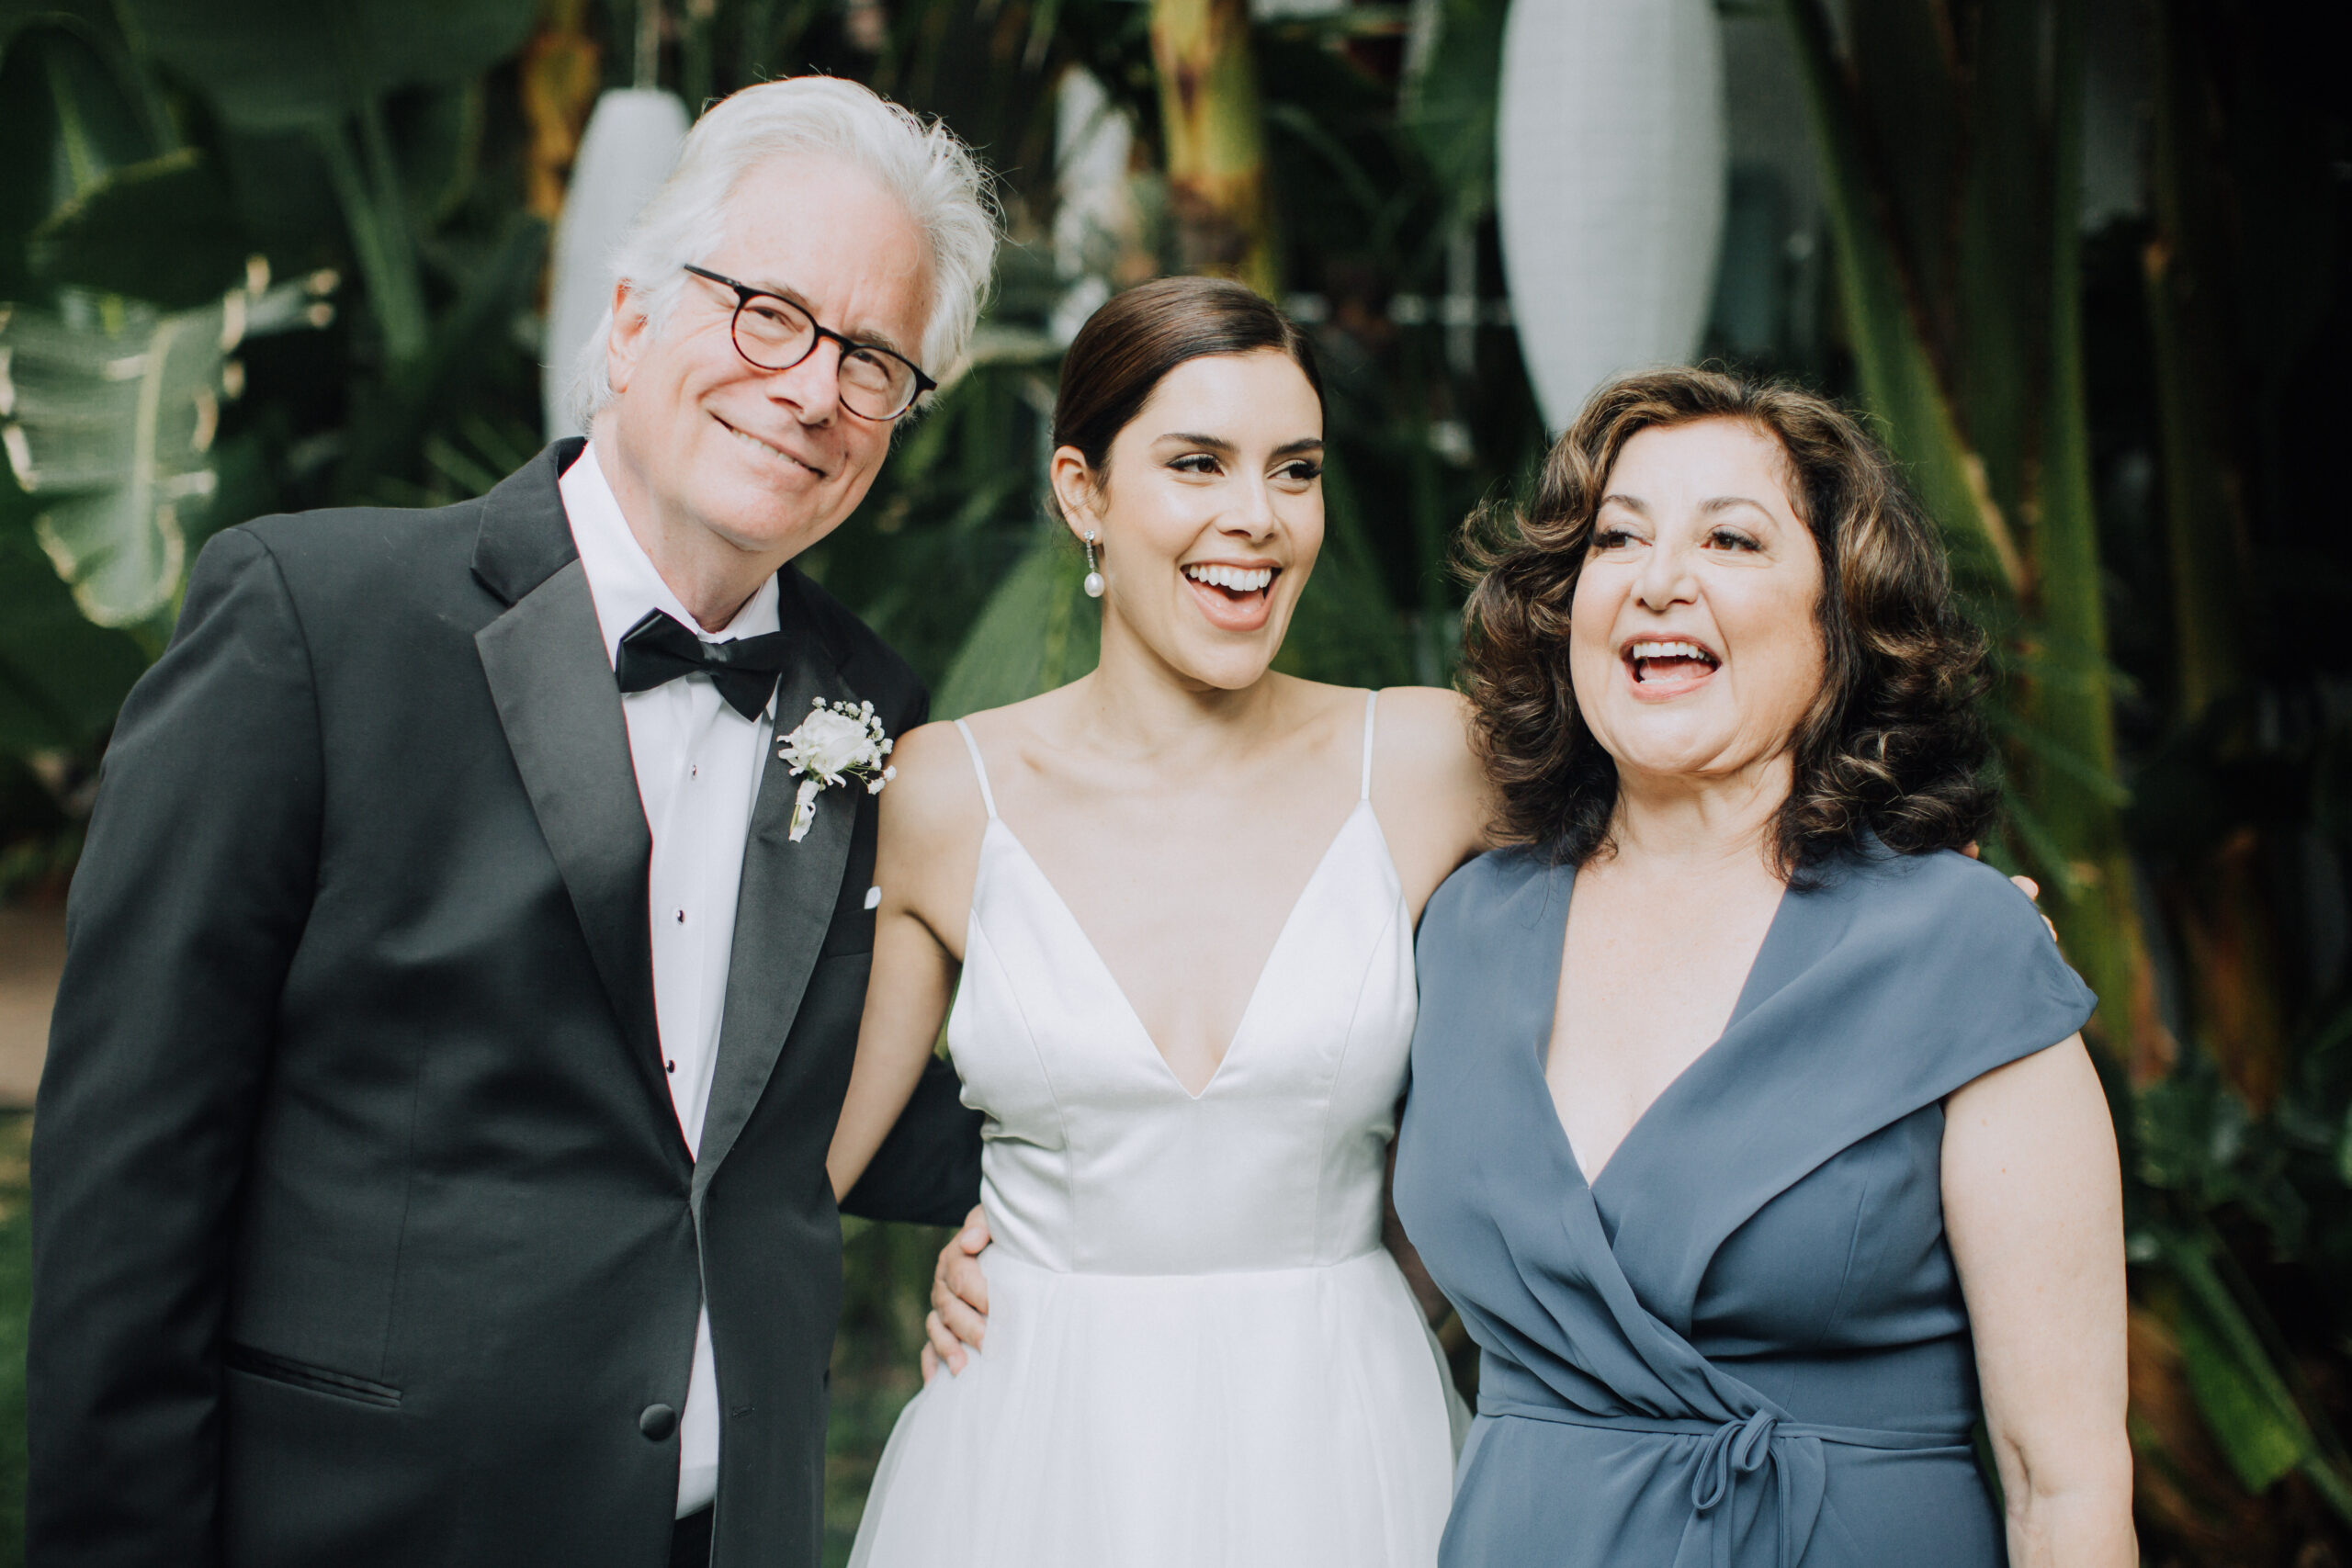 bride poses with her mom and dad before her dreamy backyard garden wedding ceremony in Los Angeles